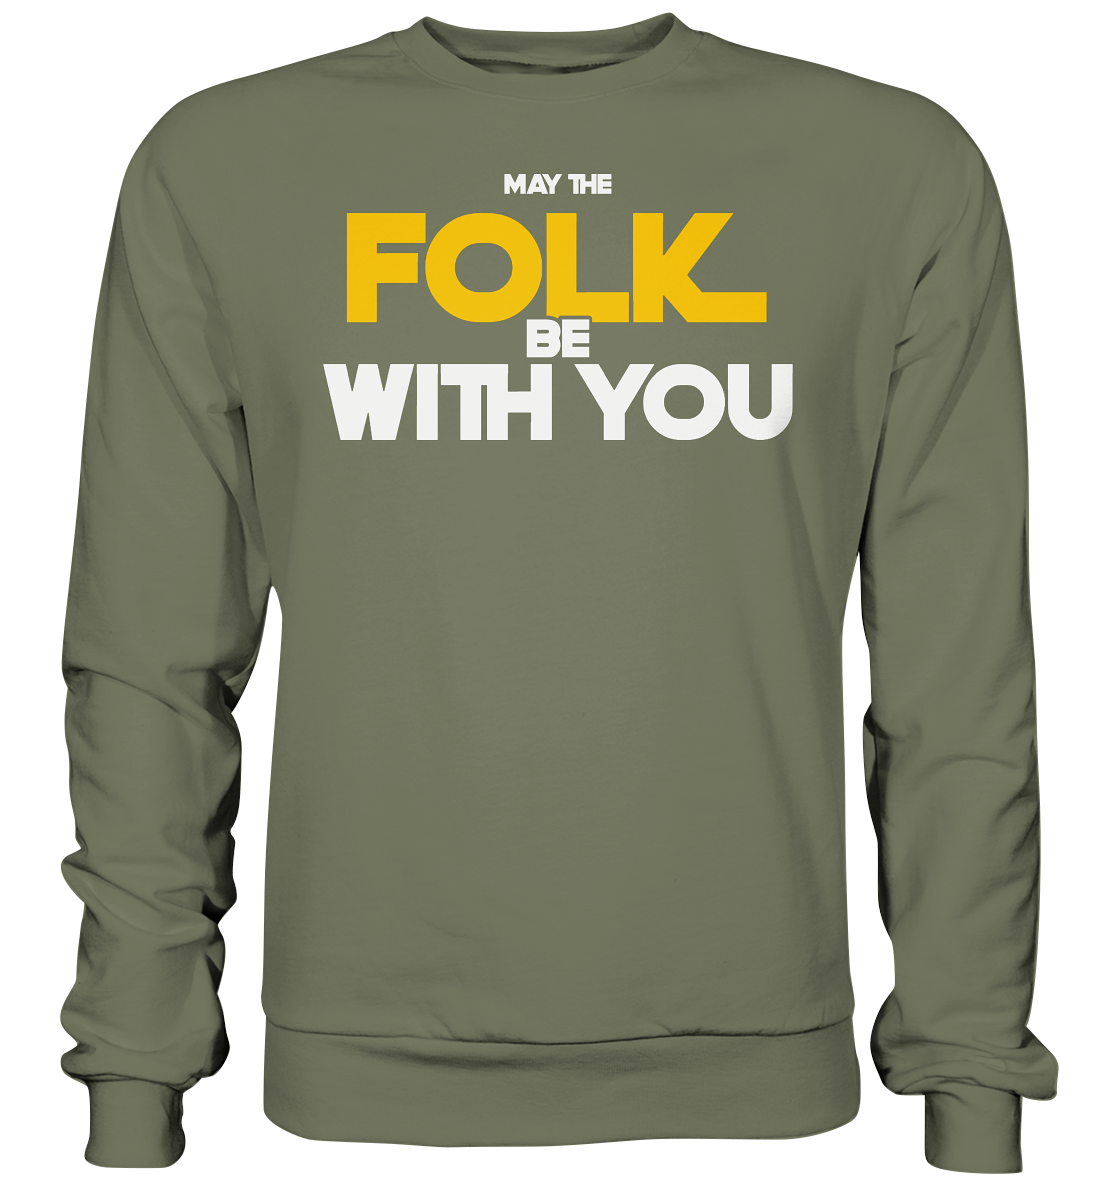 May The Folk Be With You - Premium Sweatshirt